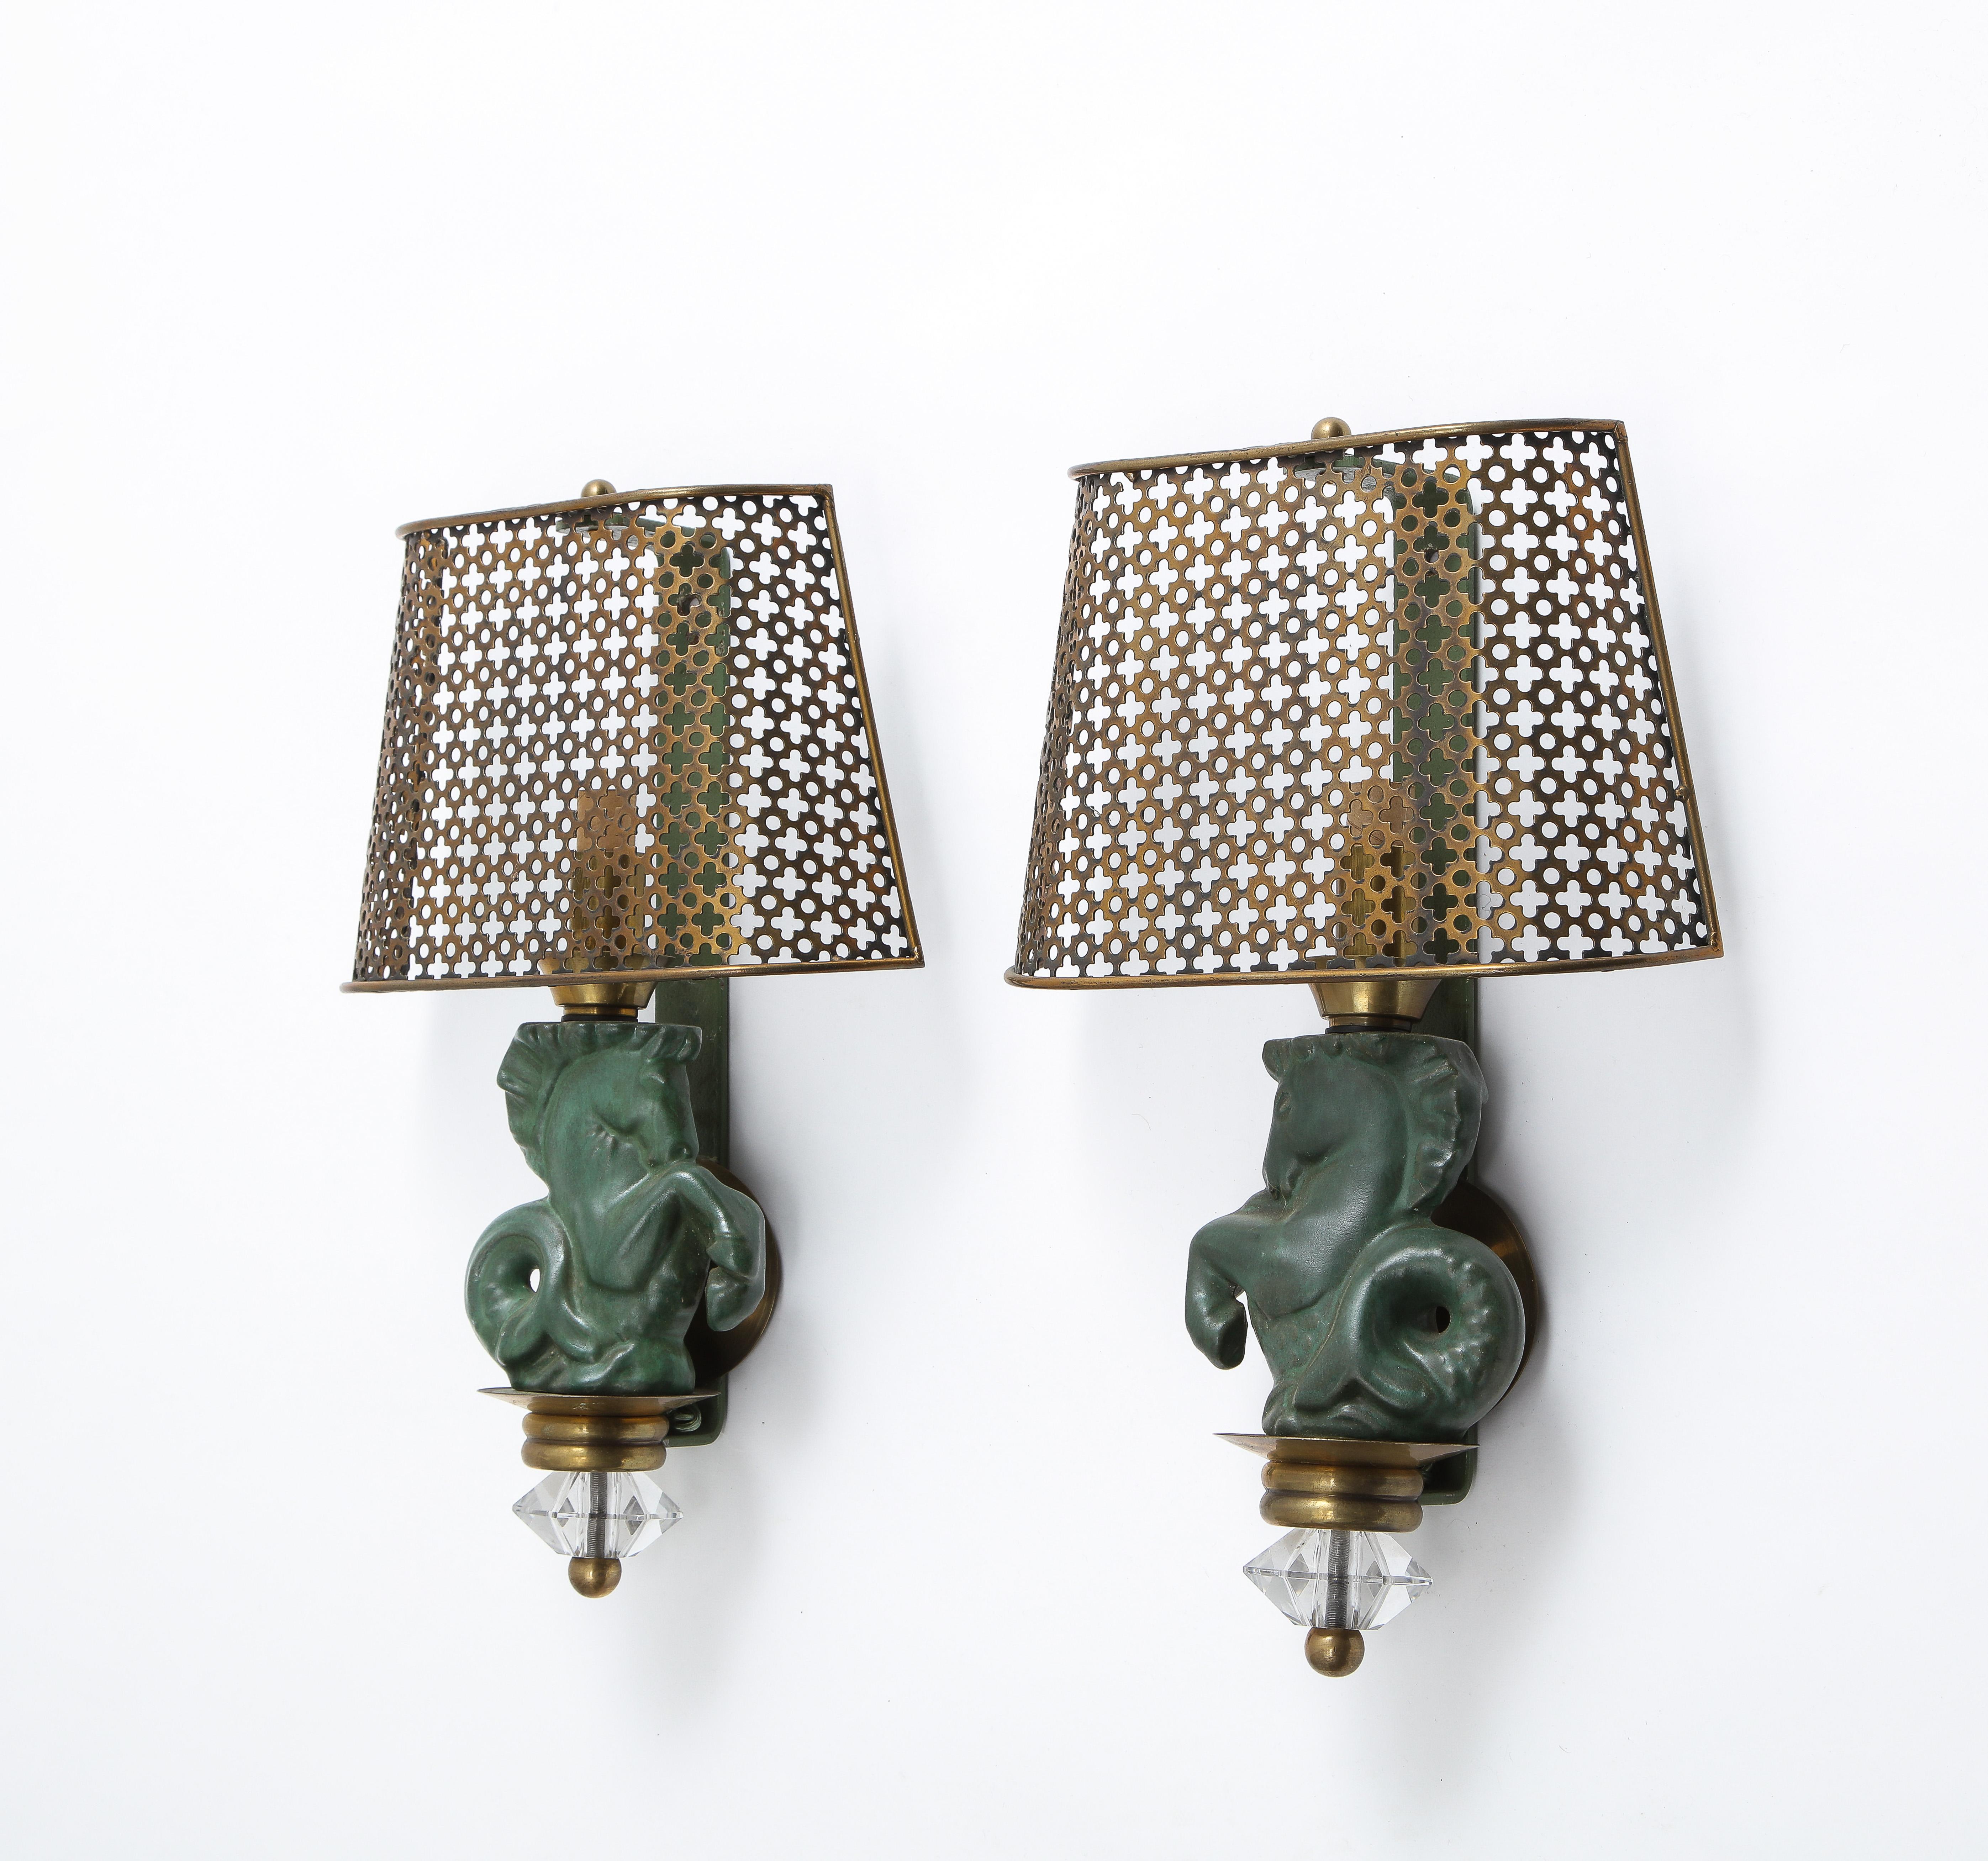 Elegant pair of ceramic seahorse sconces, the horse motif is in green glazed bisque on metal frames with clover pierced brass shades and a glass and brass finial. Rewired.